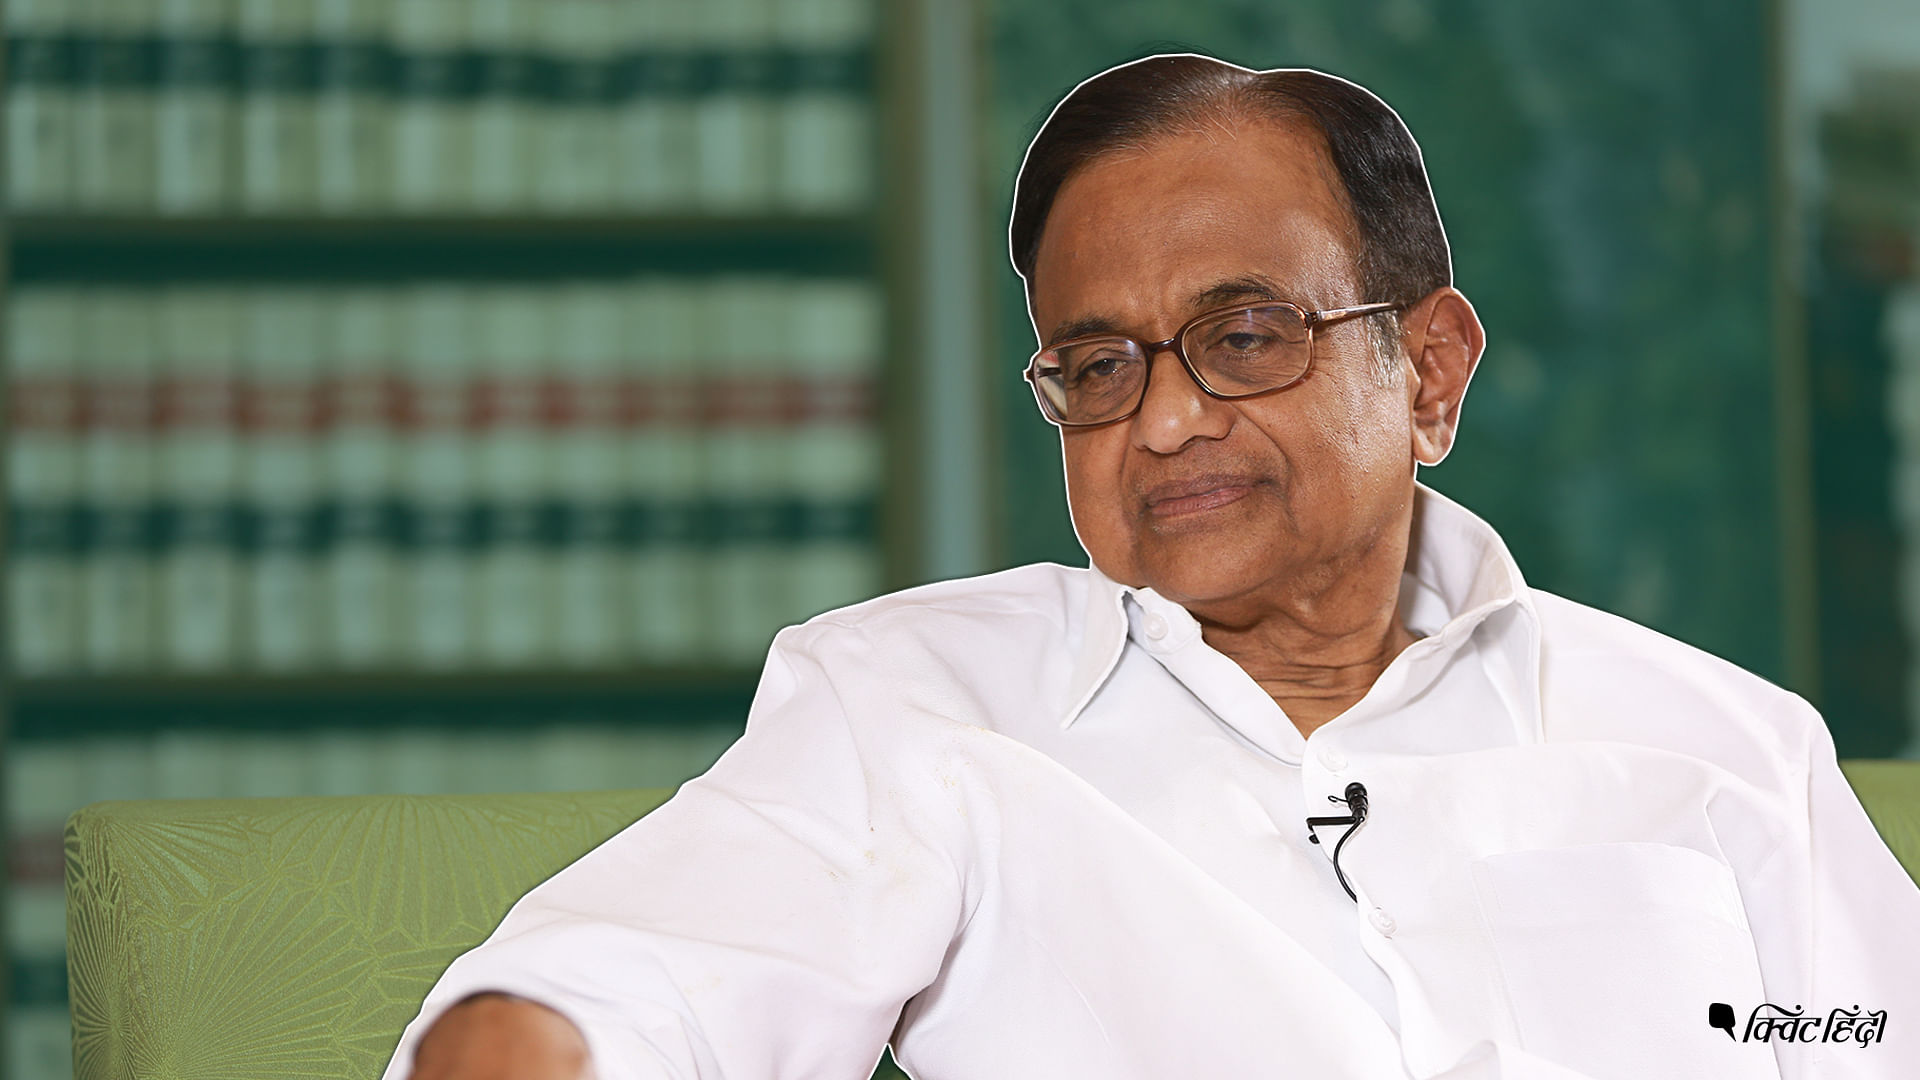 Former finance minister P Chidambaram has said that the key problem for the government in handling economic issues is the lack of economic experts while formulating policy.